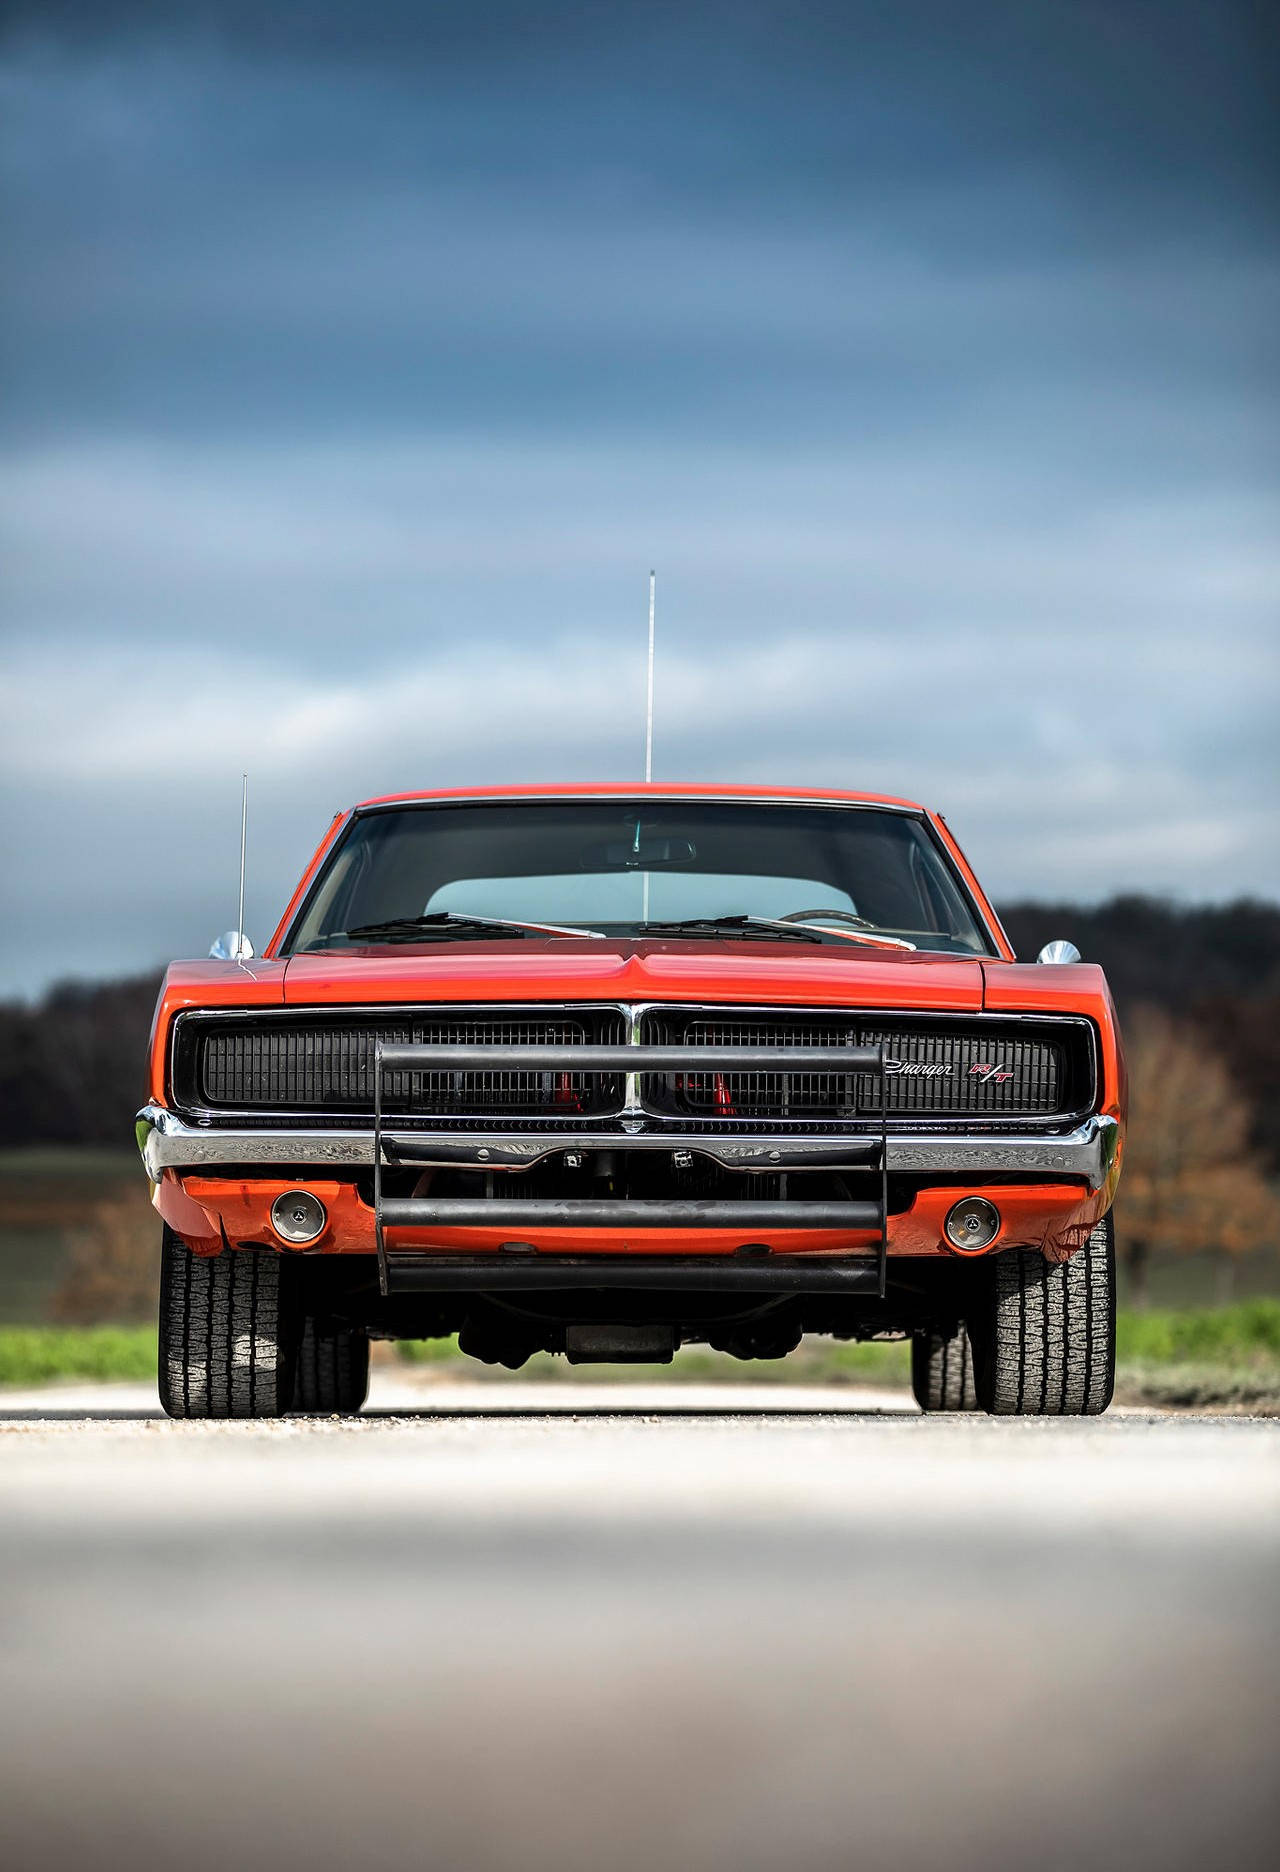 A Red Muscle Car Parked On A Road Wallpaper